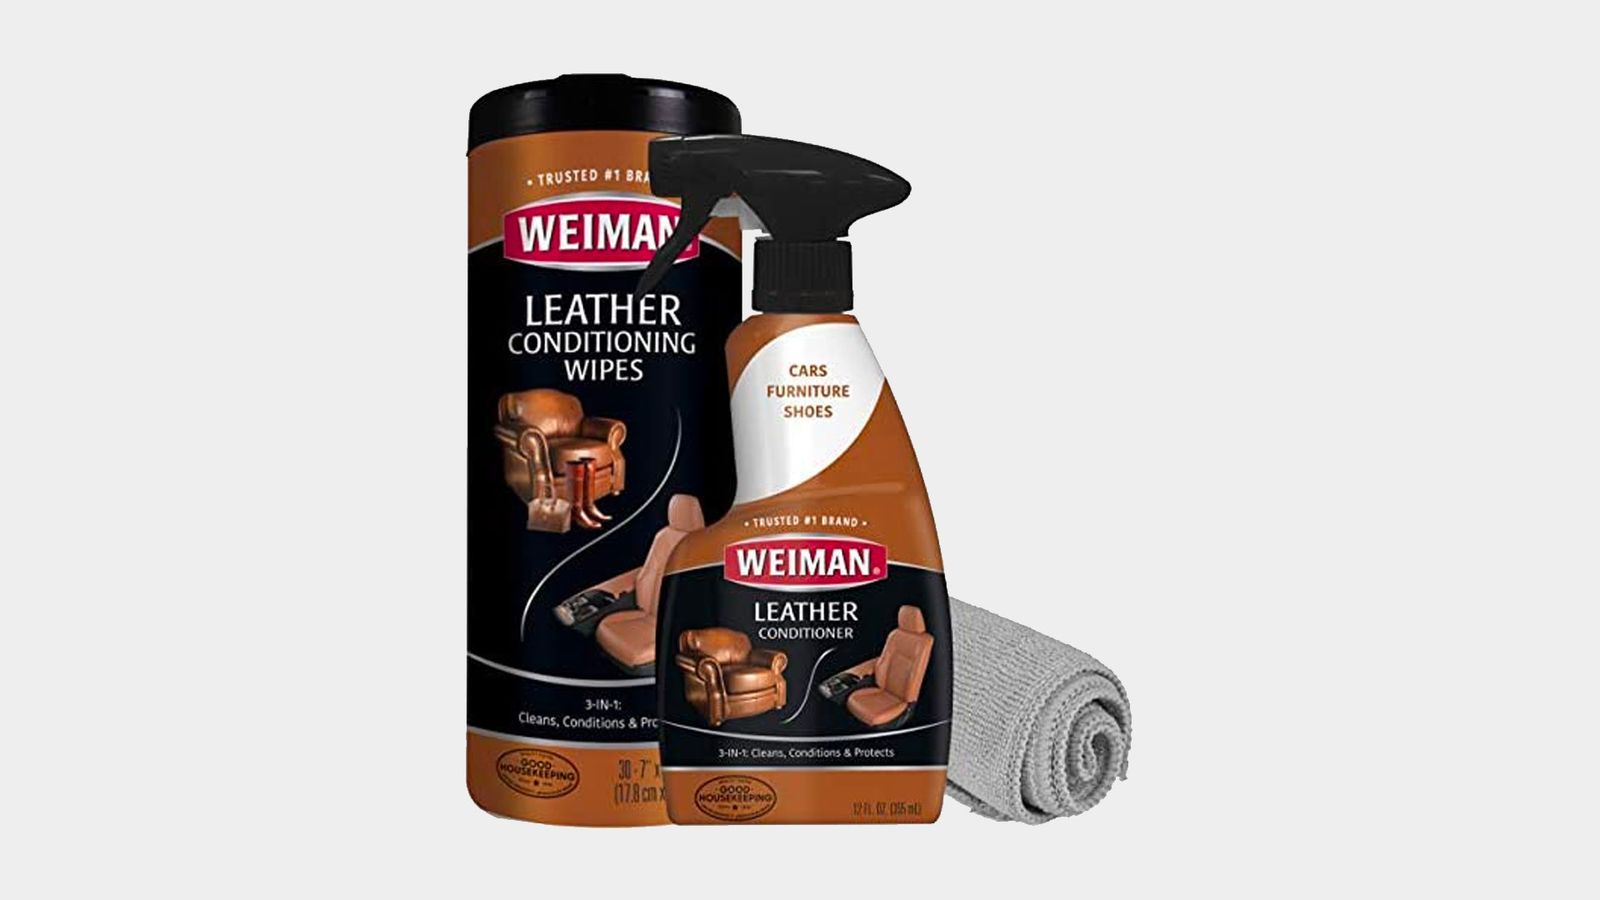 Weiman Leather Cleaner & Conditioner Care Kit product image of a black and brown spray bottle and container next to a grey cloth.